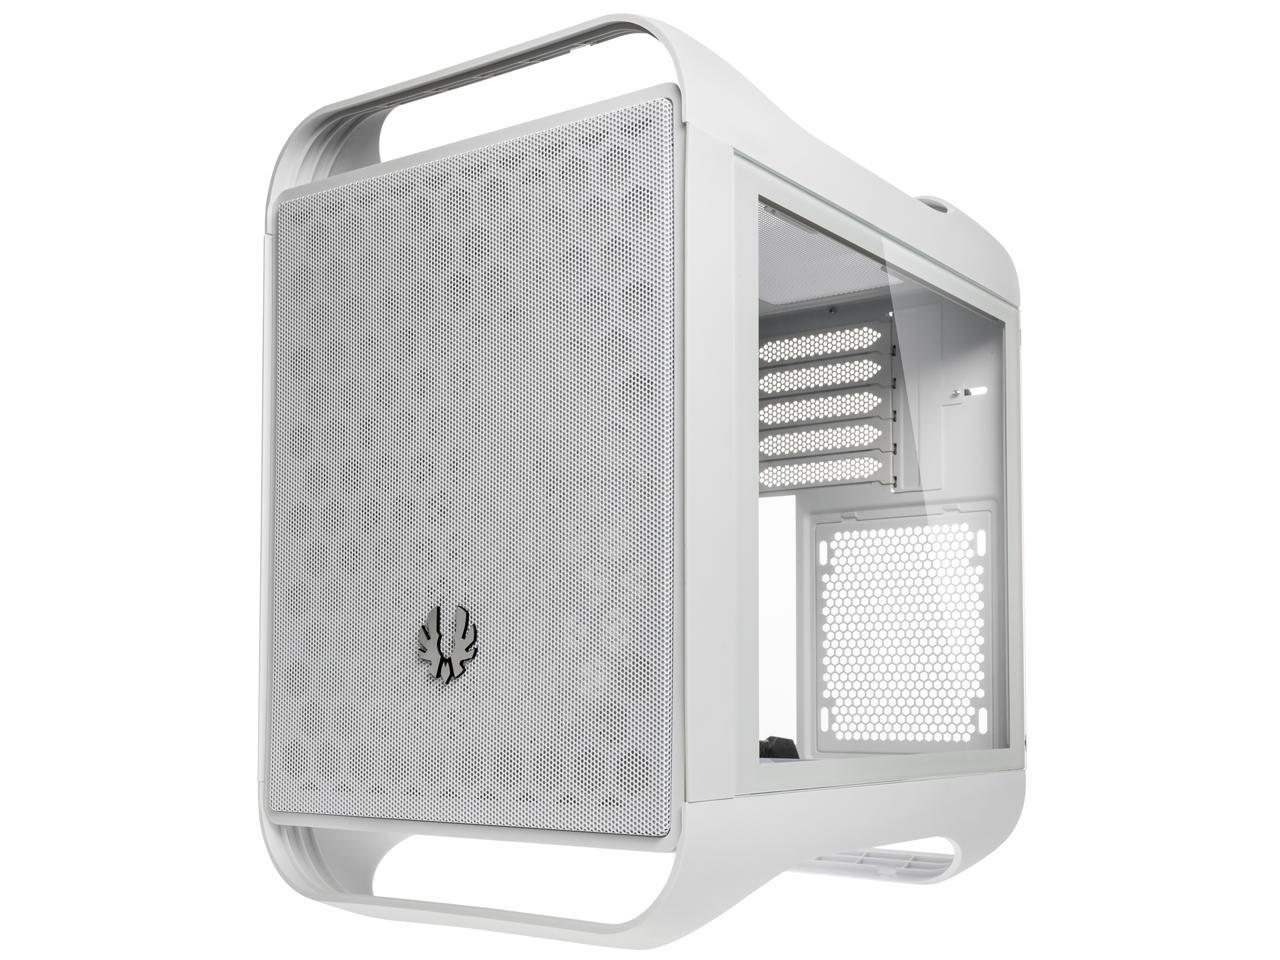 Prodigy M 2022 mATX/Mini-ITX Gaming PC Case, RTX 3090 or RX 6900 XT Ready, Vertical GPU and Water Cooling Mounting, Tempered Glass, USB 3.2 Type-C and 2X USB 3.0 Type-A, White - Newegg.com